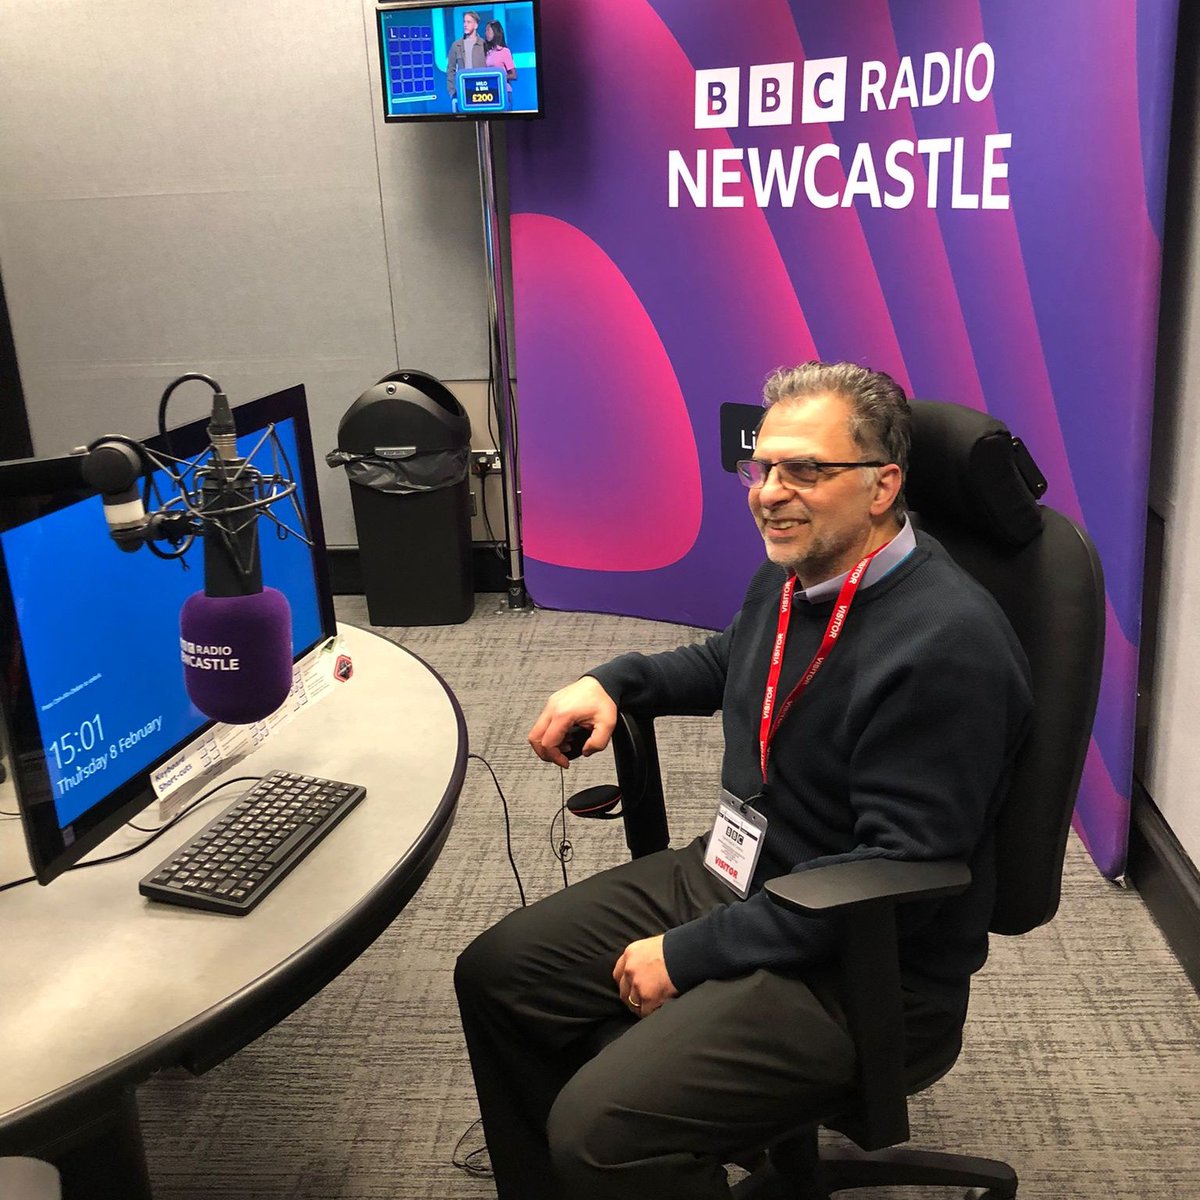 📻Tune into @Radio_Newcastle tomorrow - 8 March - between 12 and 1pm to hear @Yan_Yiannakou talking about how registries such as #ResearchPlusMe can support mental health research. Find out more about Research+Me: ➡️researchplusme.co.uk